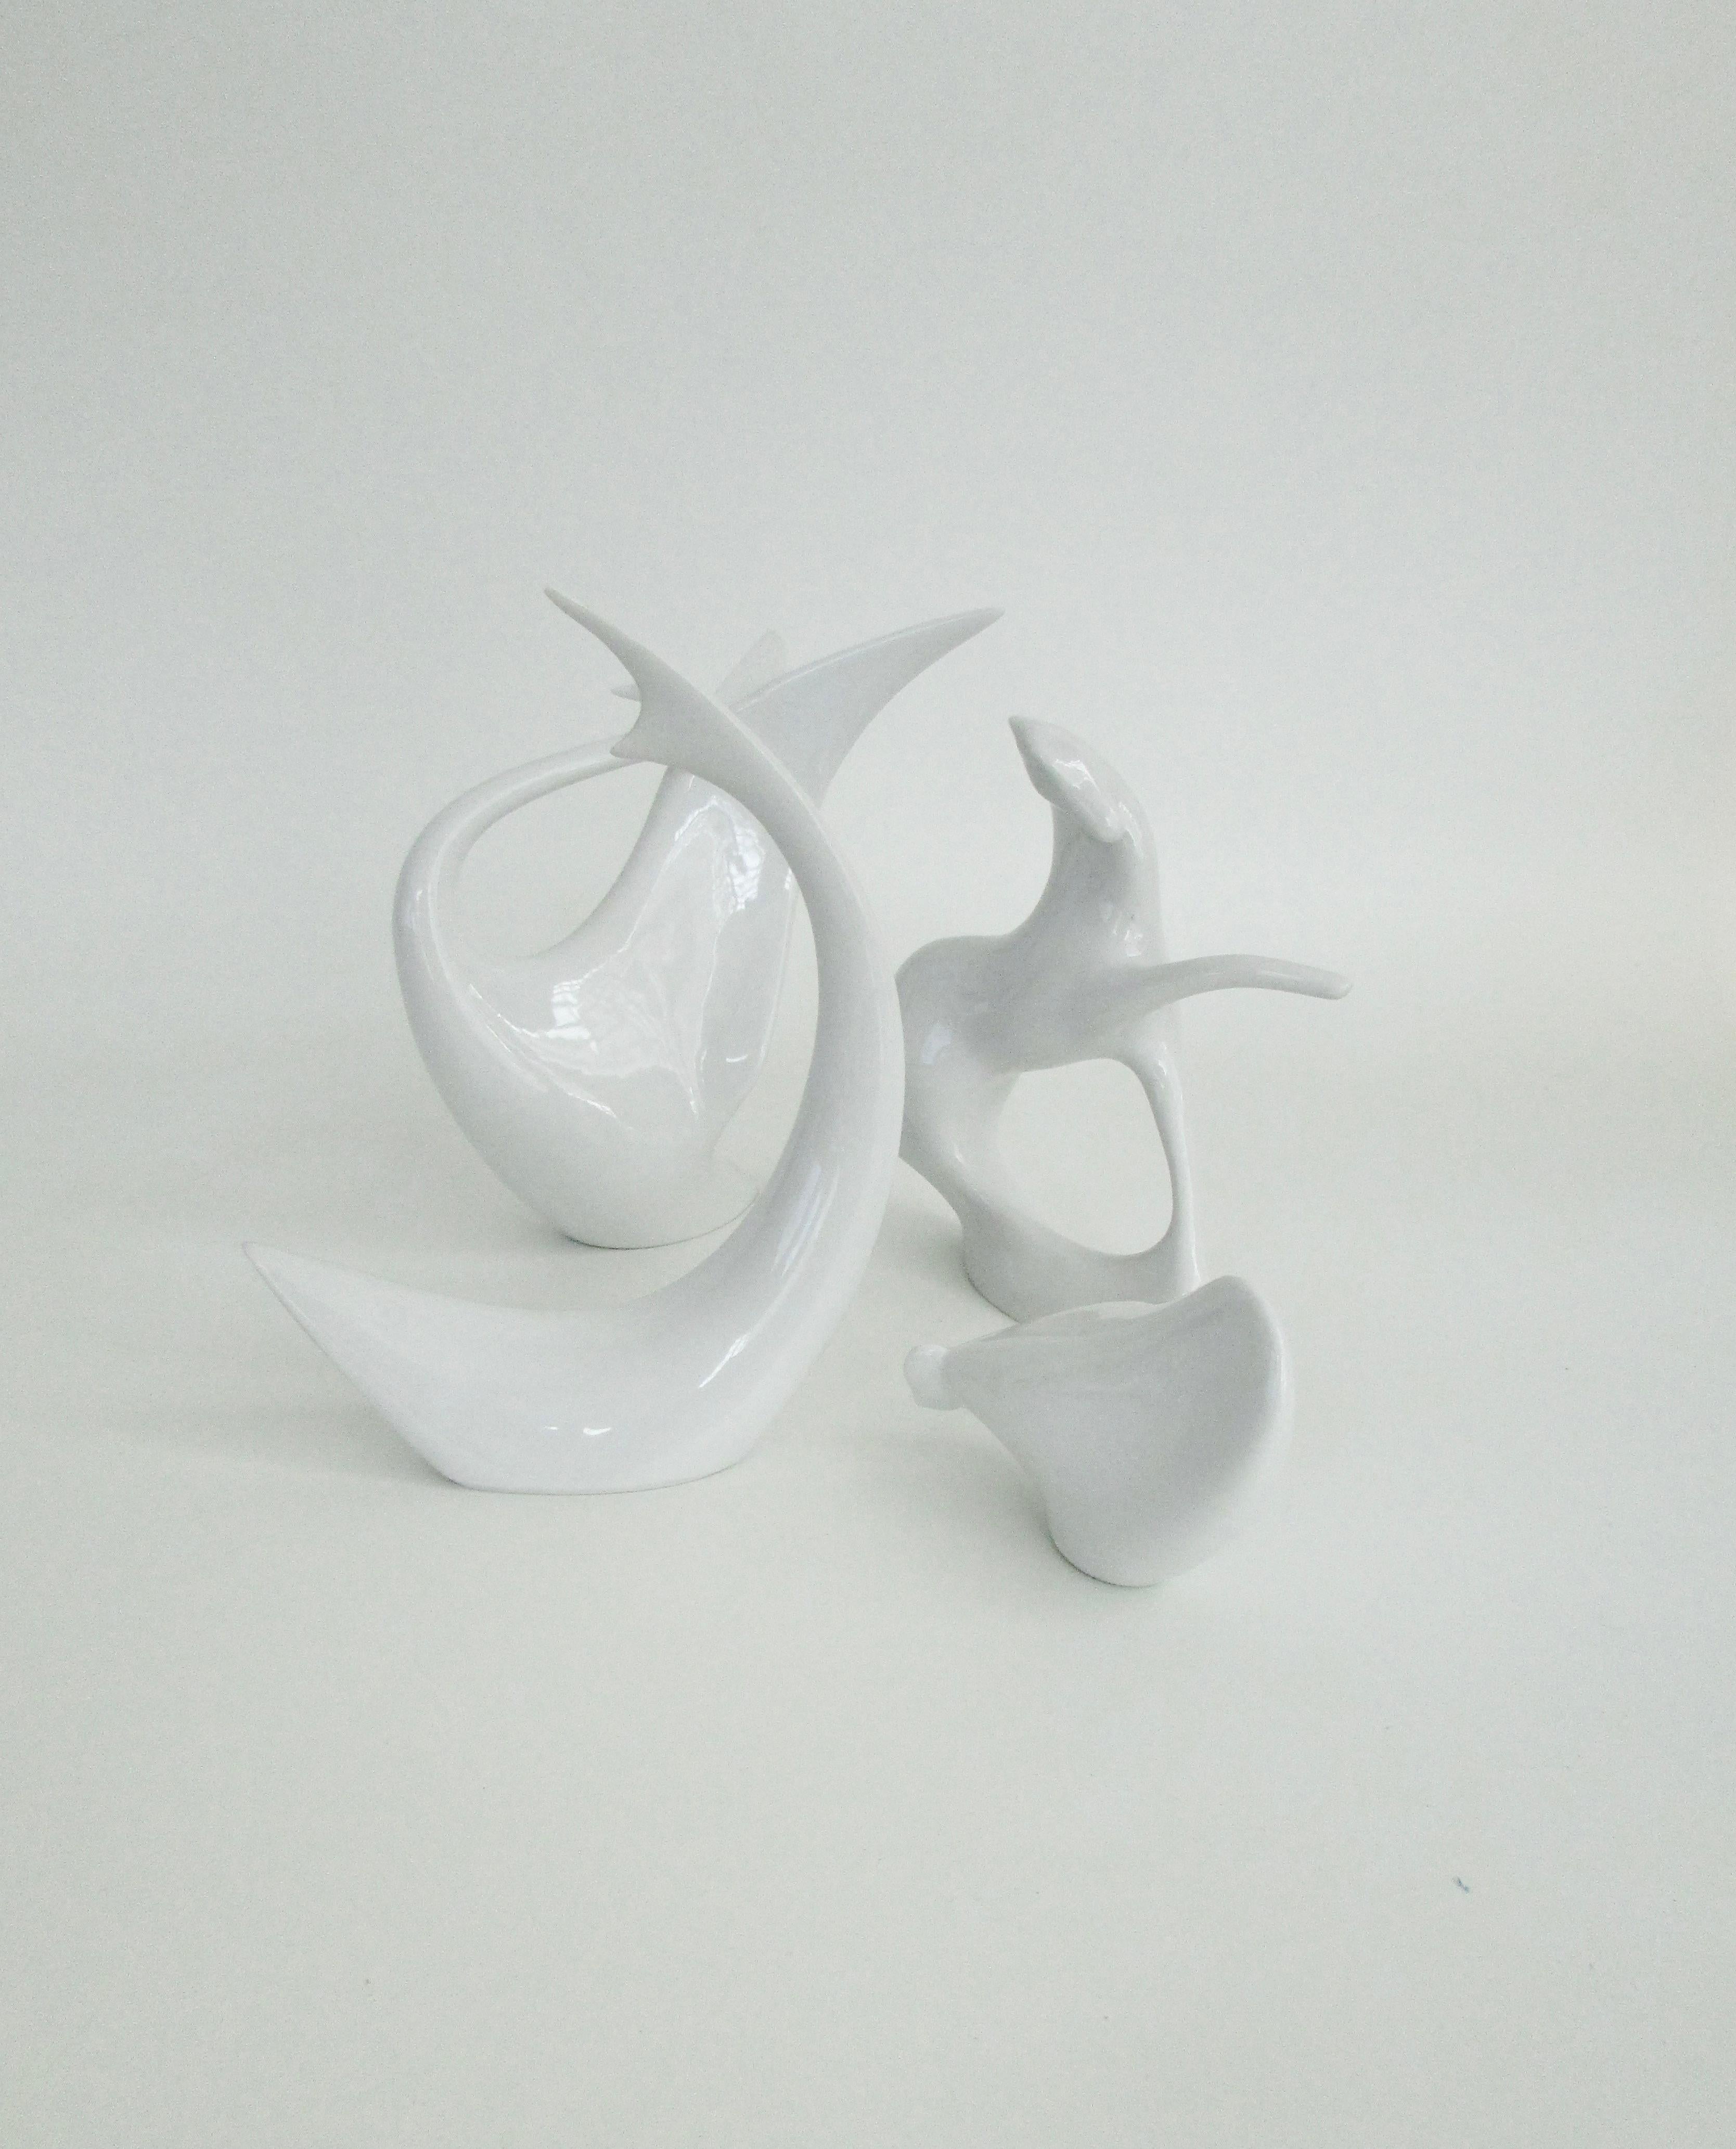 Please note these are priced separately  Royal Dux porcelain stylized sculptural figures . Shark at 7.5